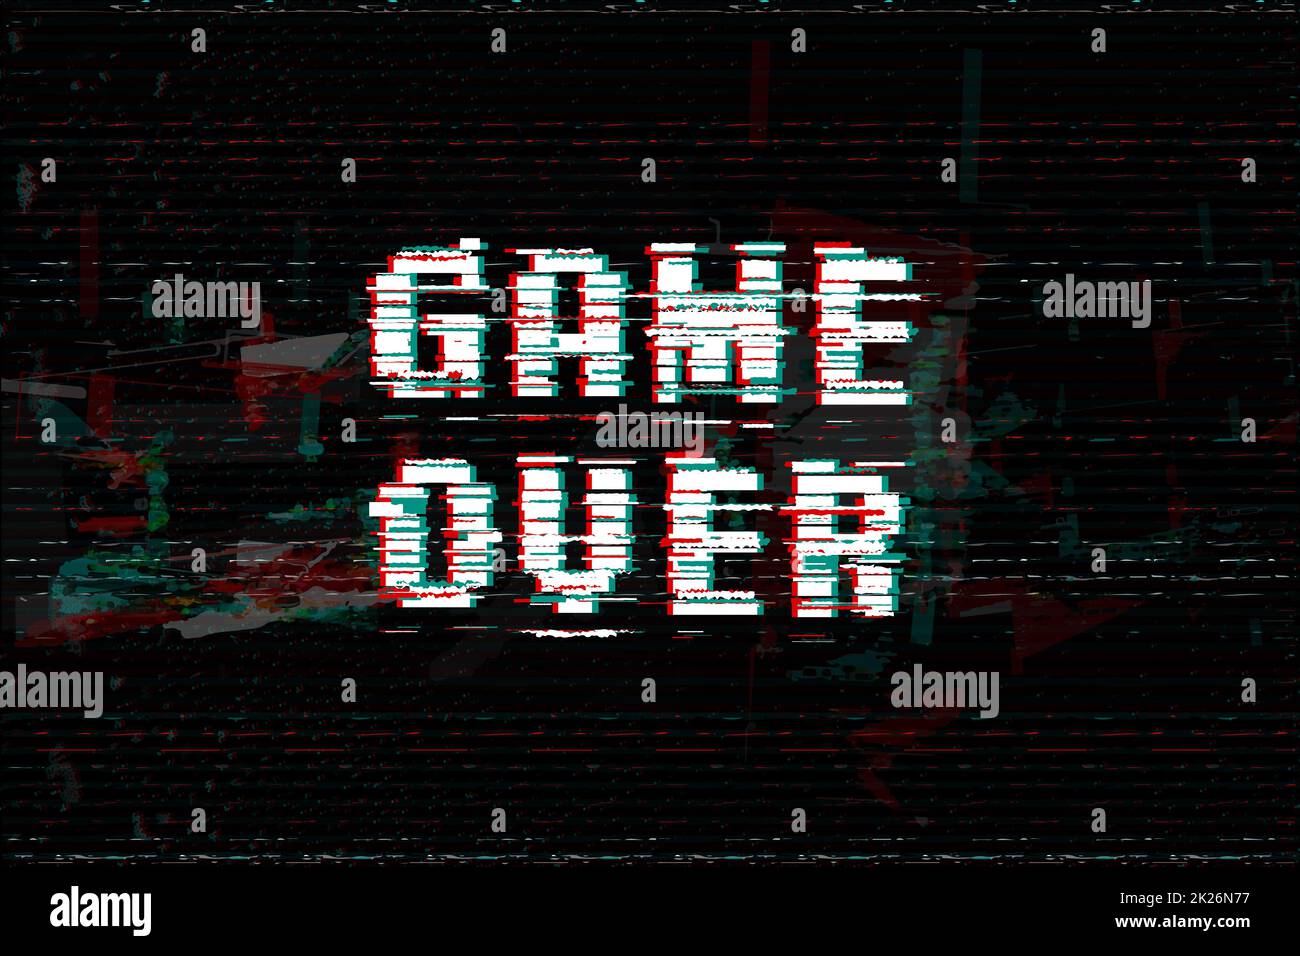 Game Over, screen message, vector illustration. Glitch effect text, digital noise background. Stock Photo